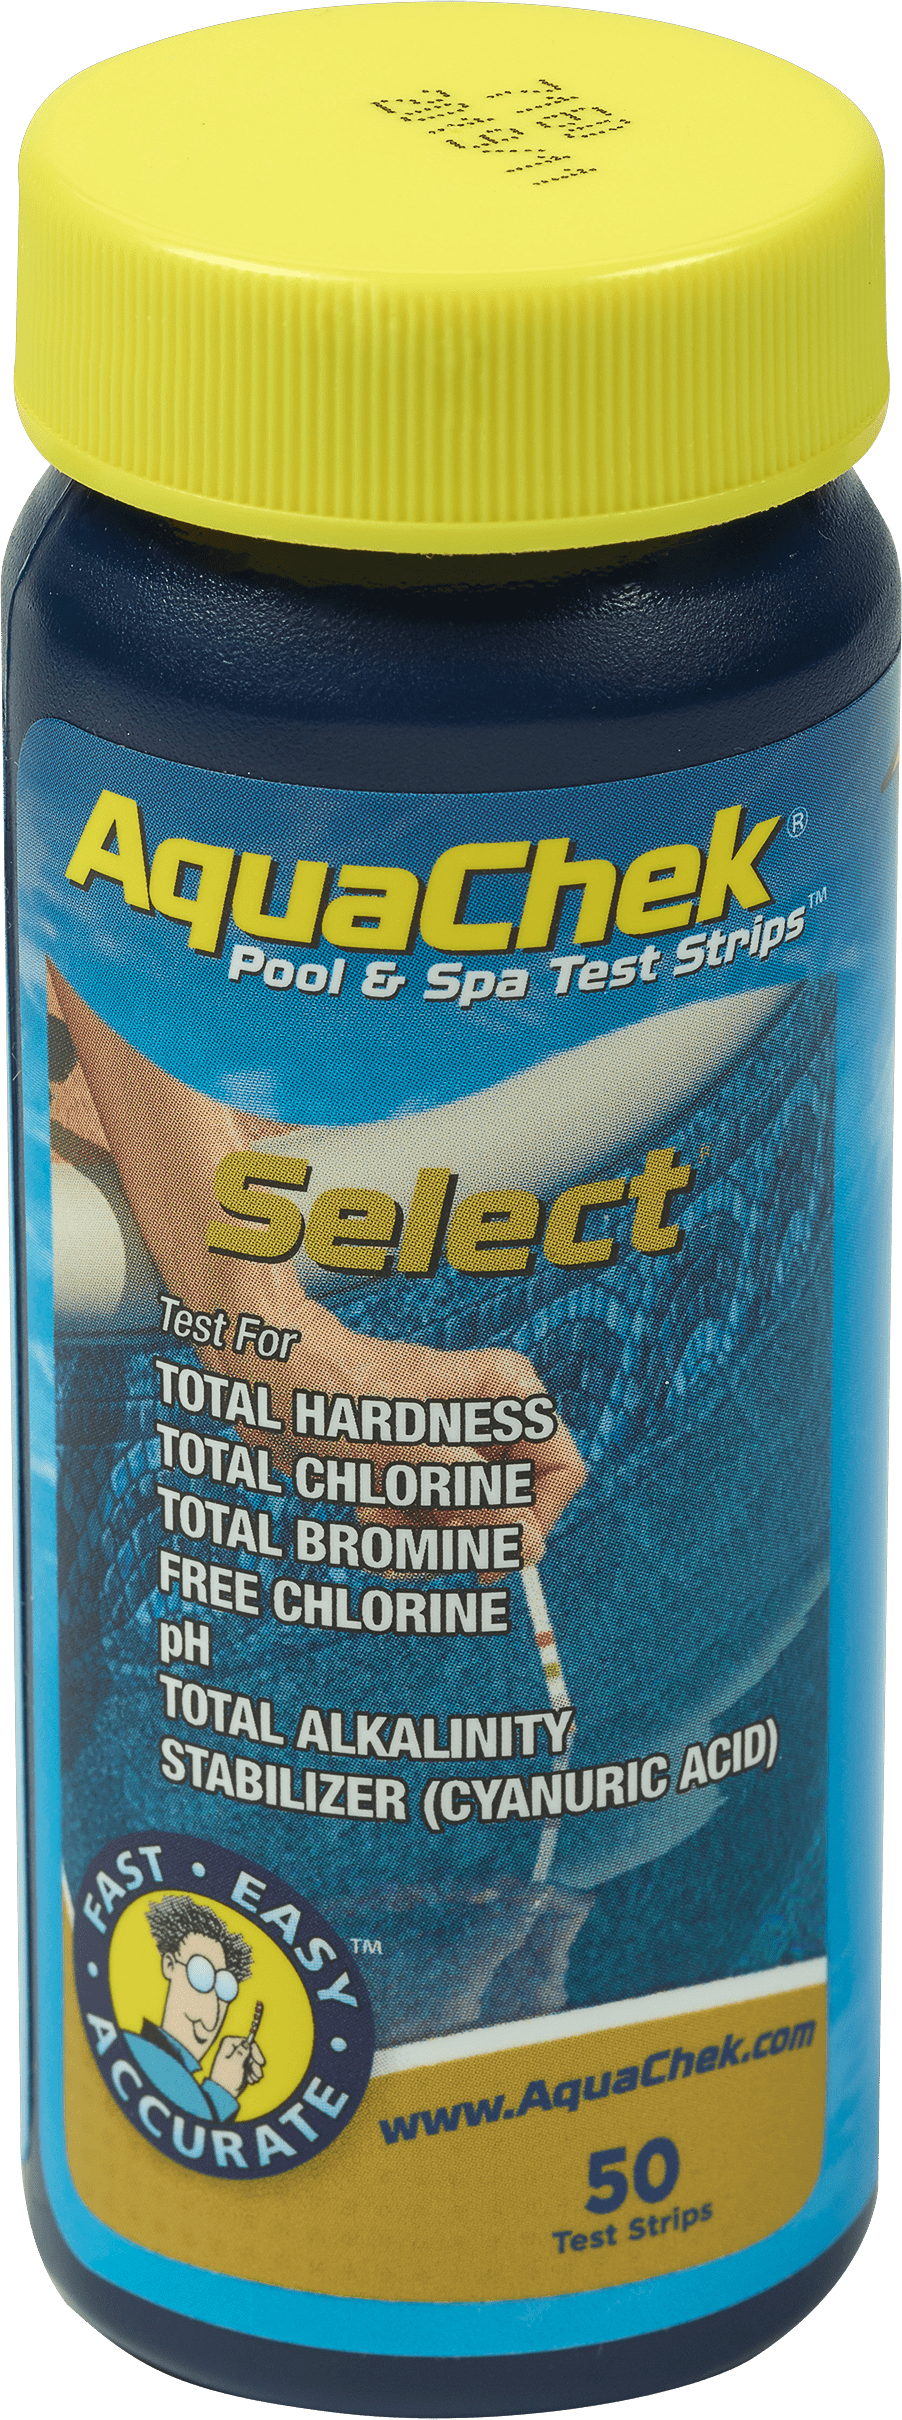 541604 Aquachek Select Test Strip - CLEARANCE SAFETY COVERS